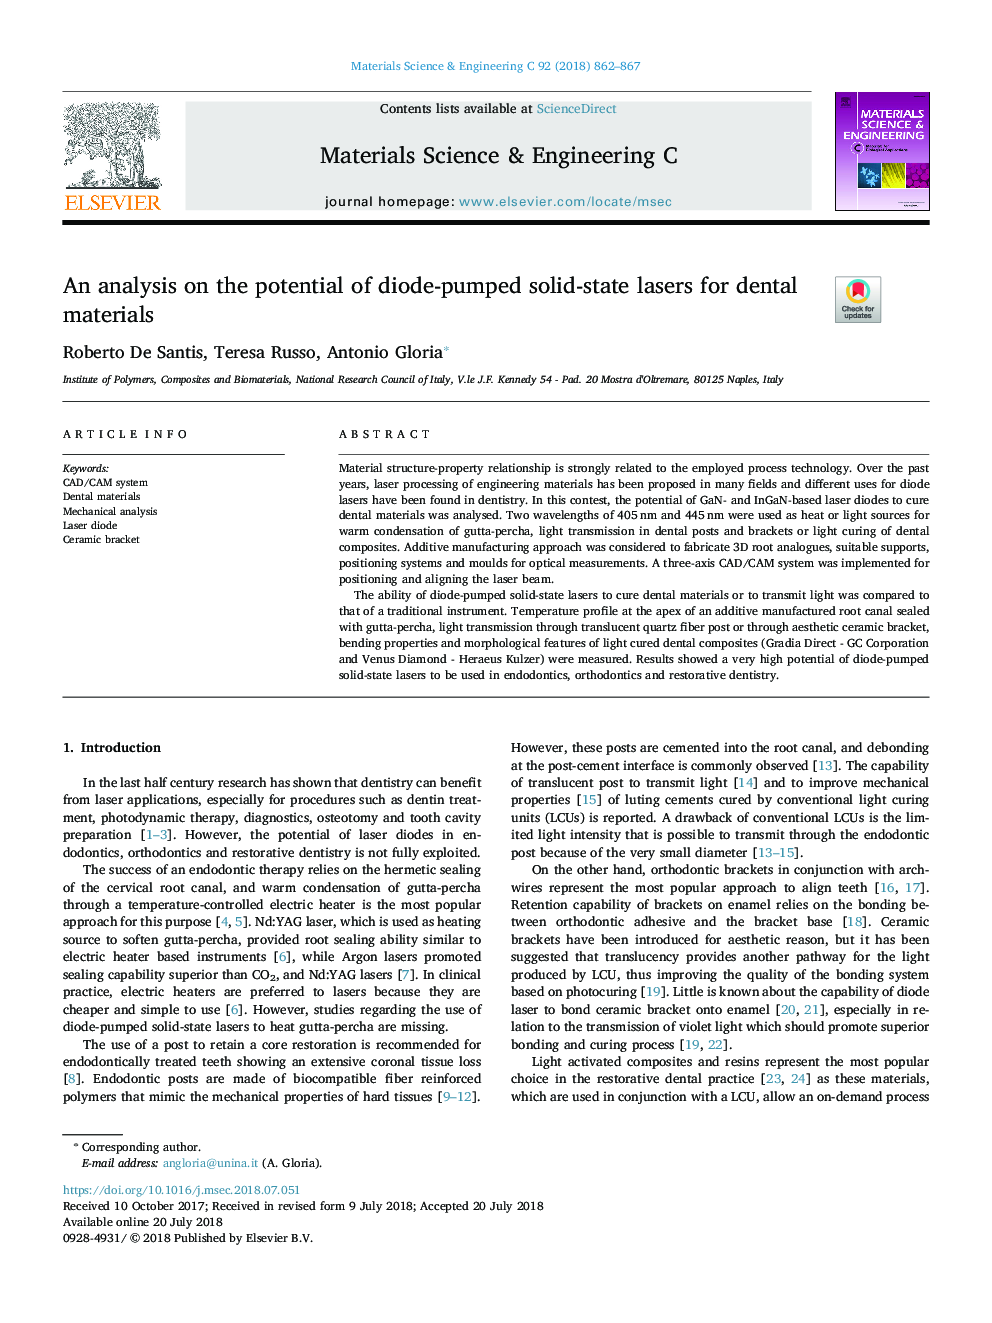 An analysis on the potential of diode-pumped solid-state lasers for dental materials